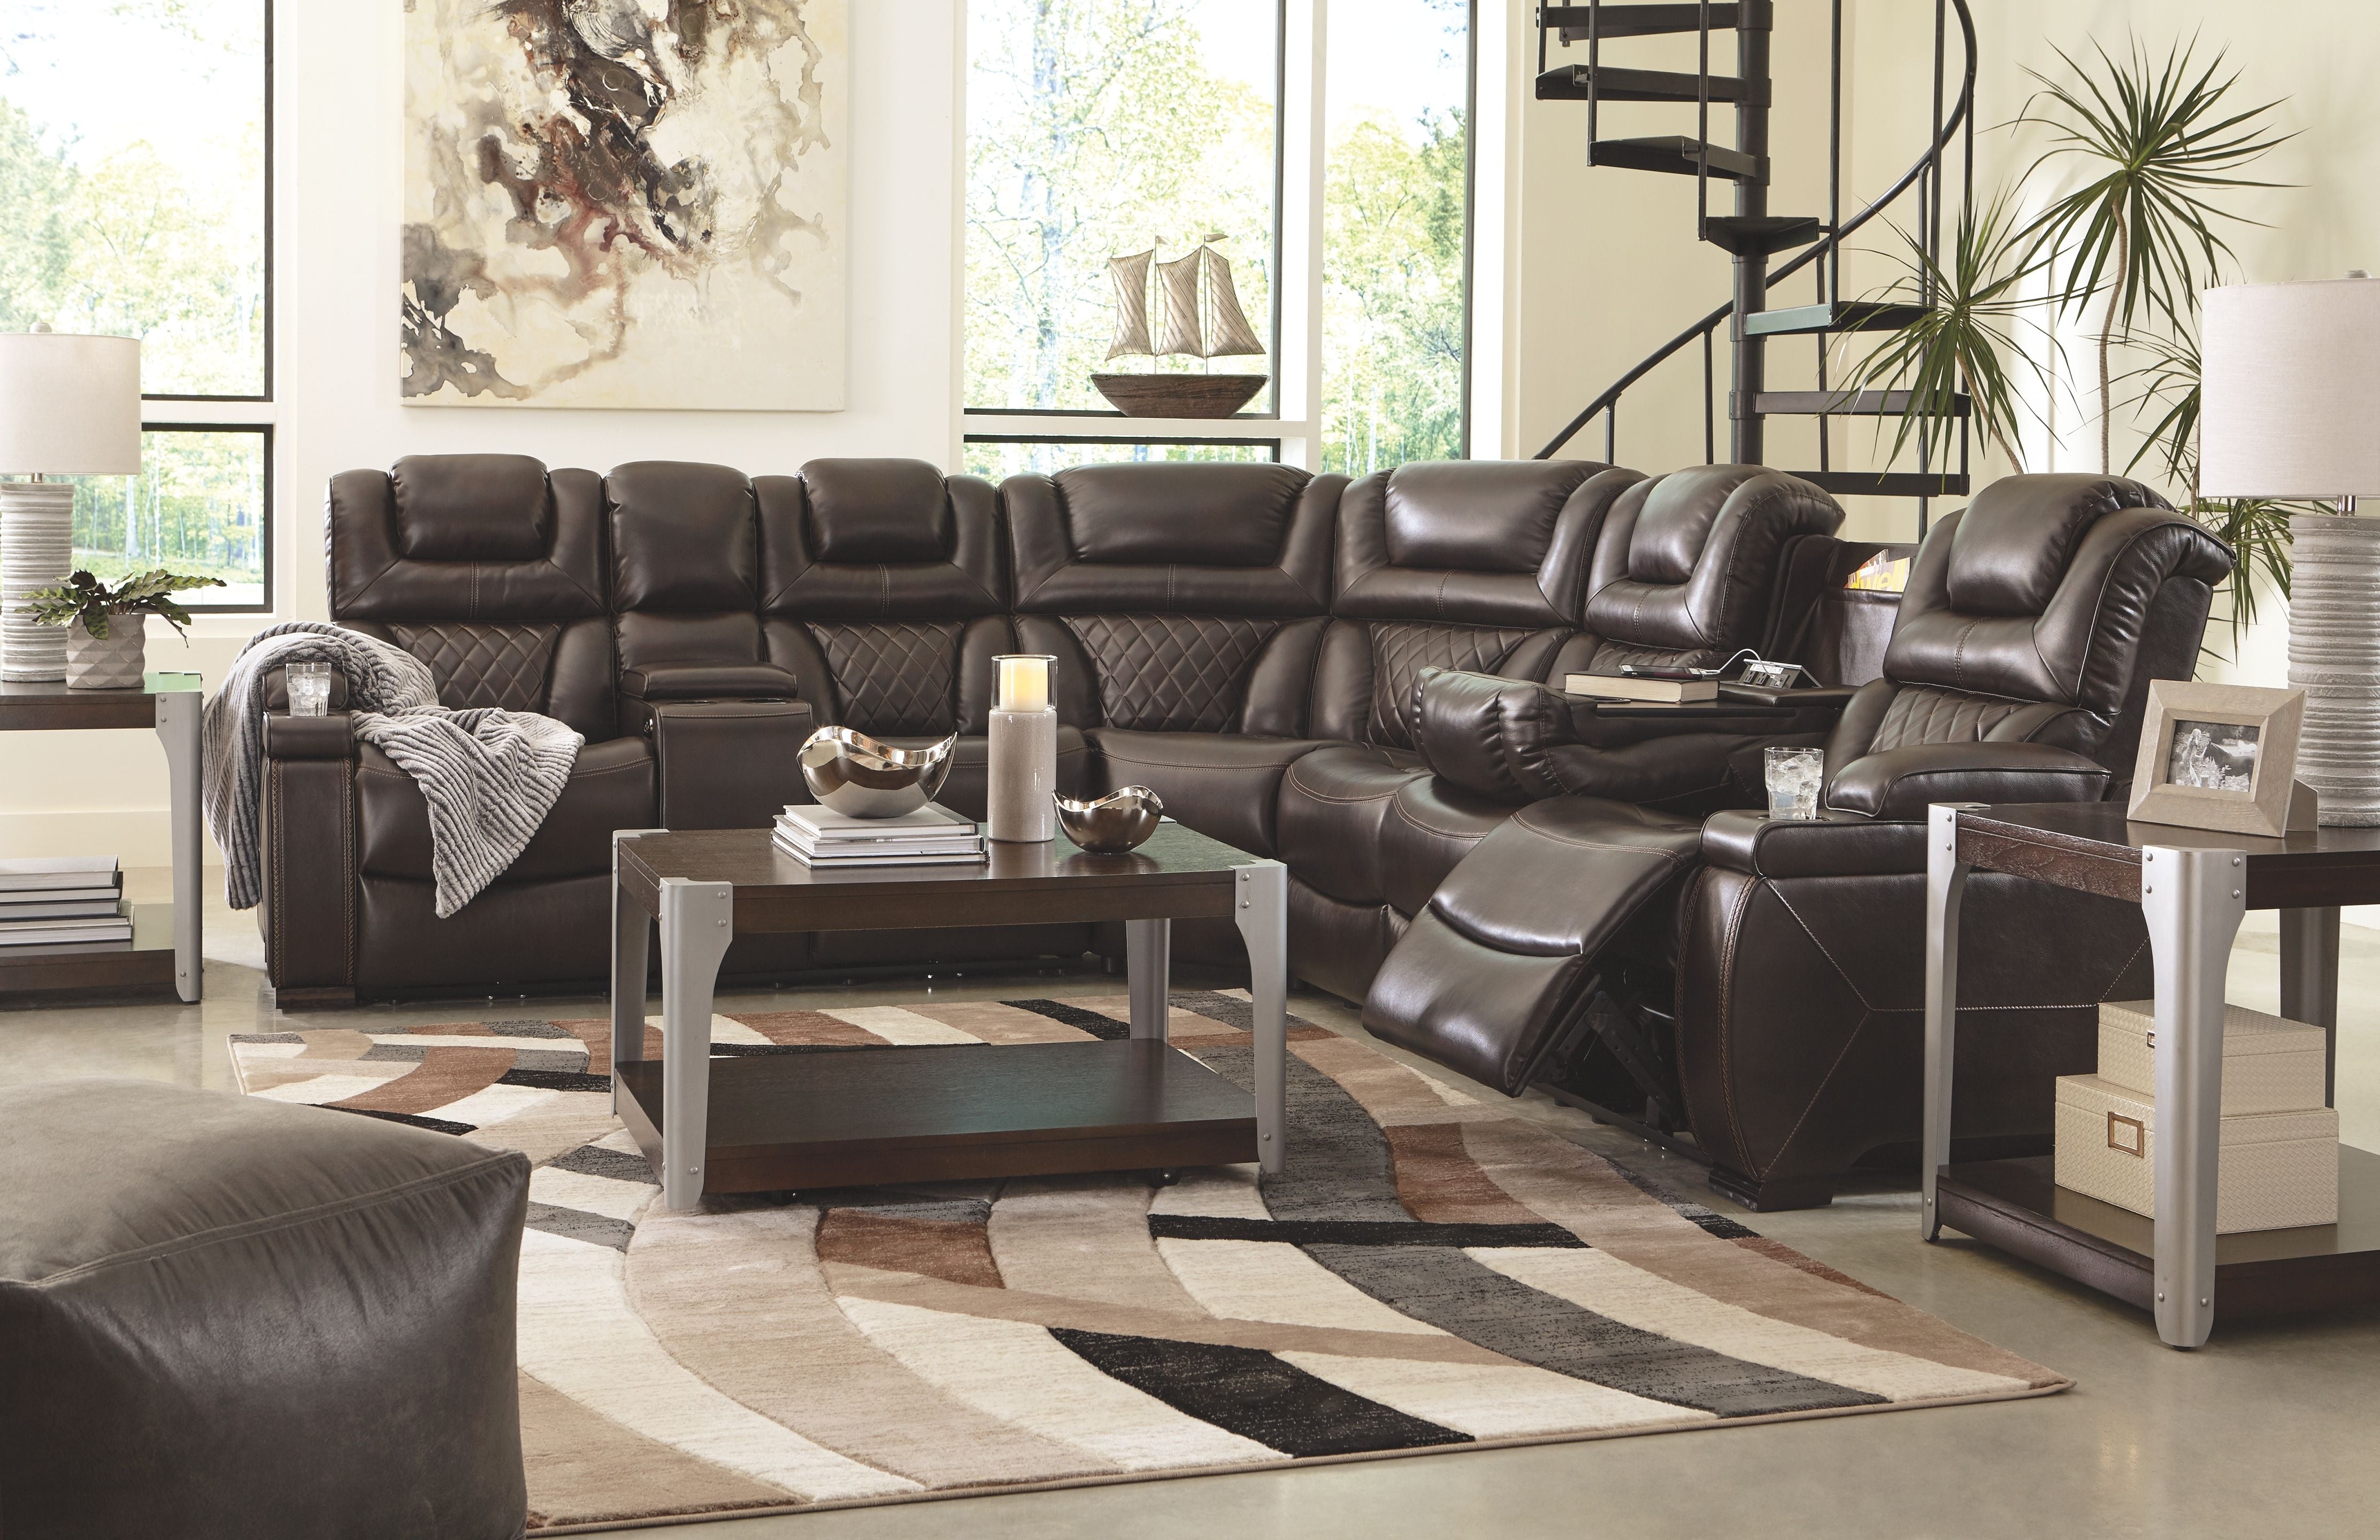 Warnerton 3-Piece Power Reclining Brown Sectional (Chocolate)-Reclining Sectionals-American Furniture Outlet